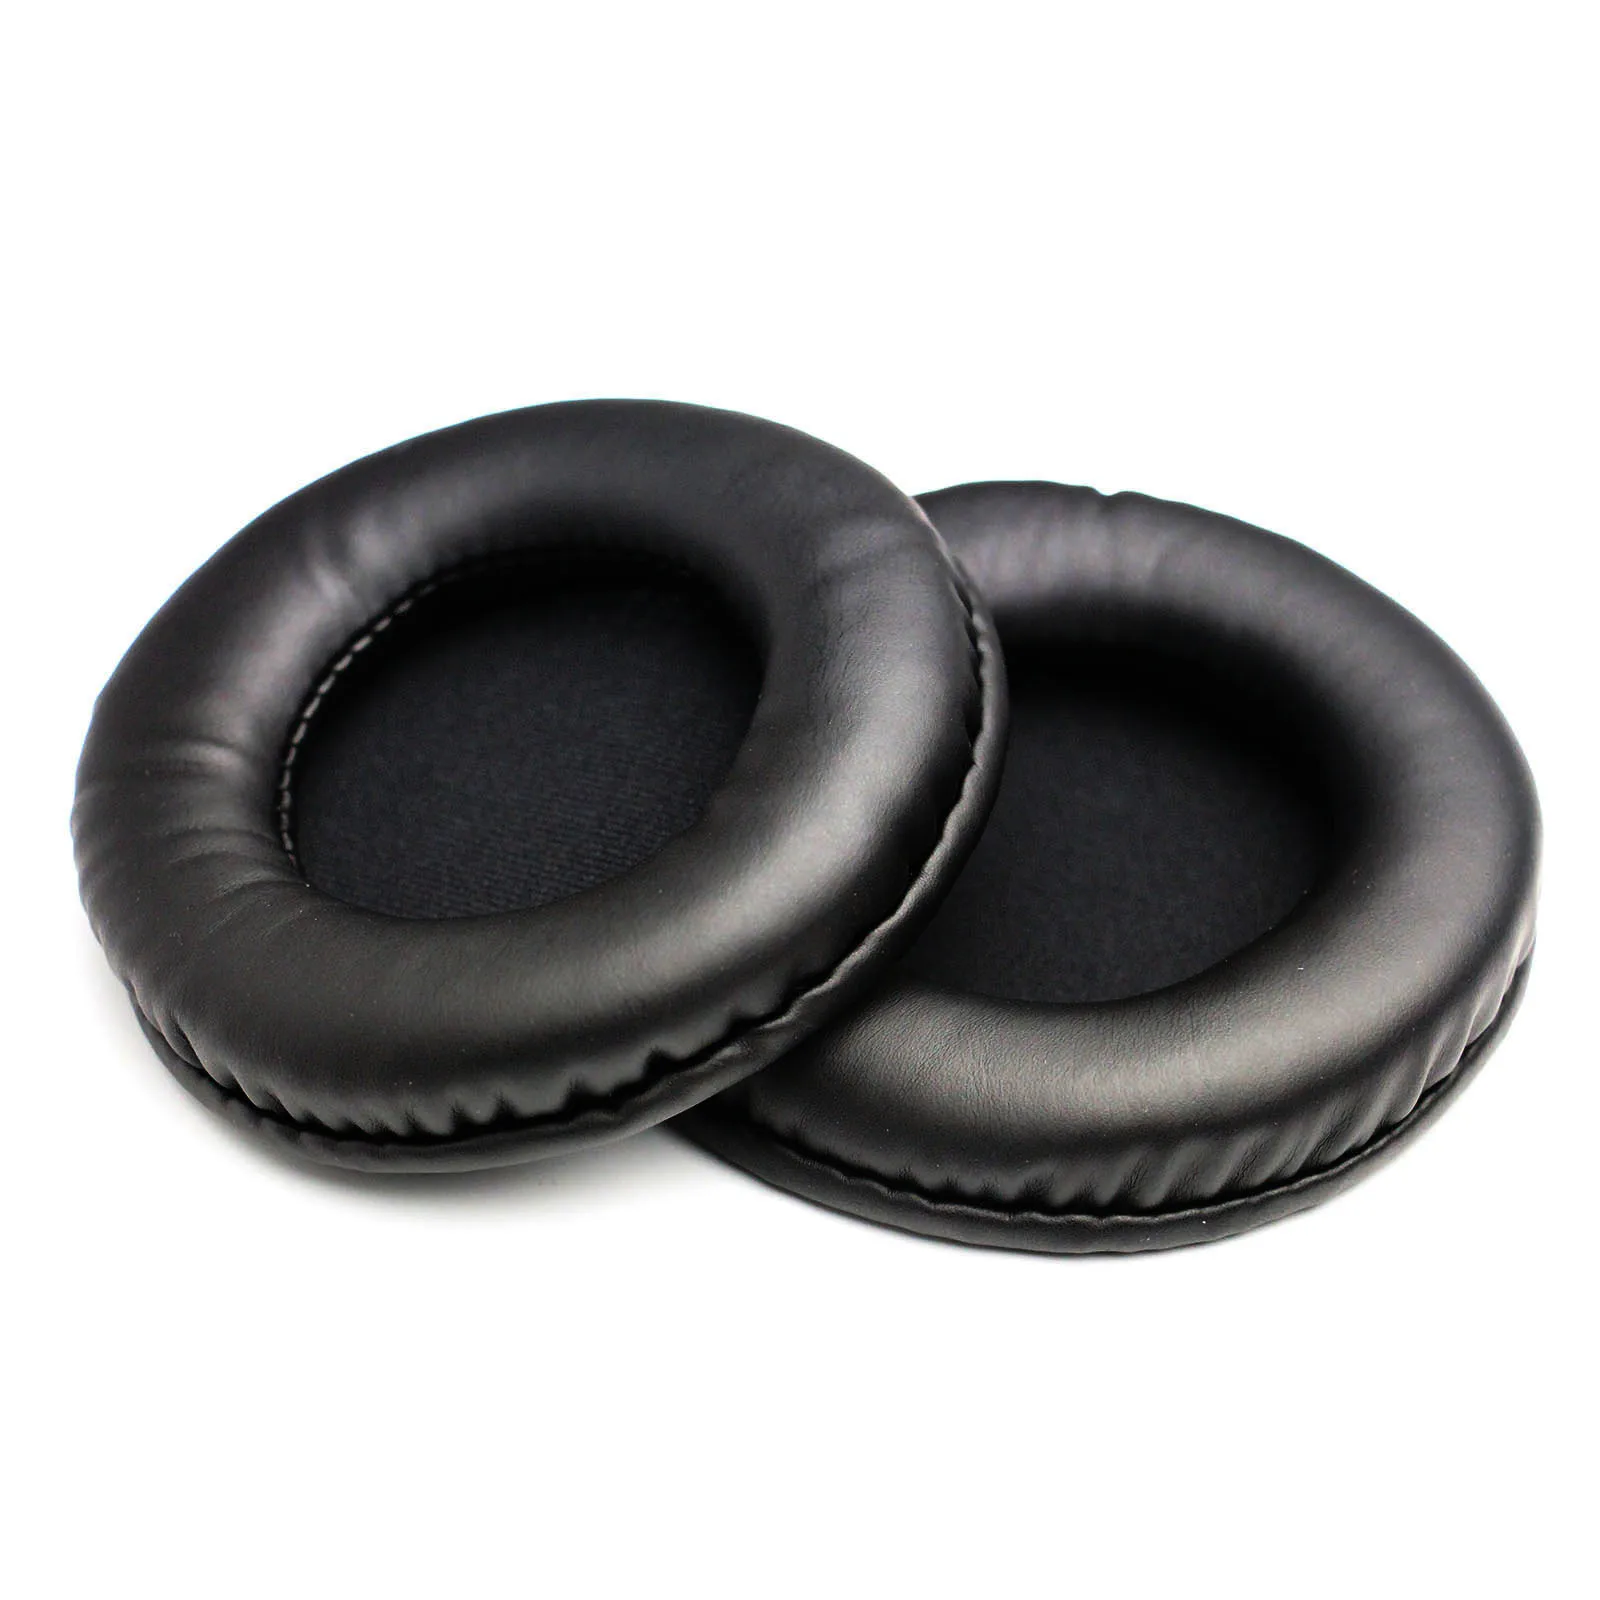 

Replacement Foam Ear Pads Cushions for Sony MDR-DS7000 RF6000 MDR-MA300 CD470 Headphones Earpads